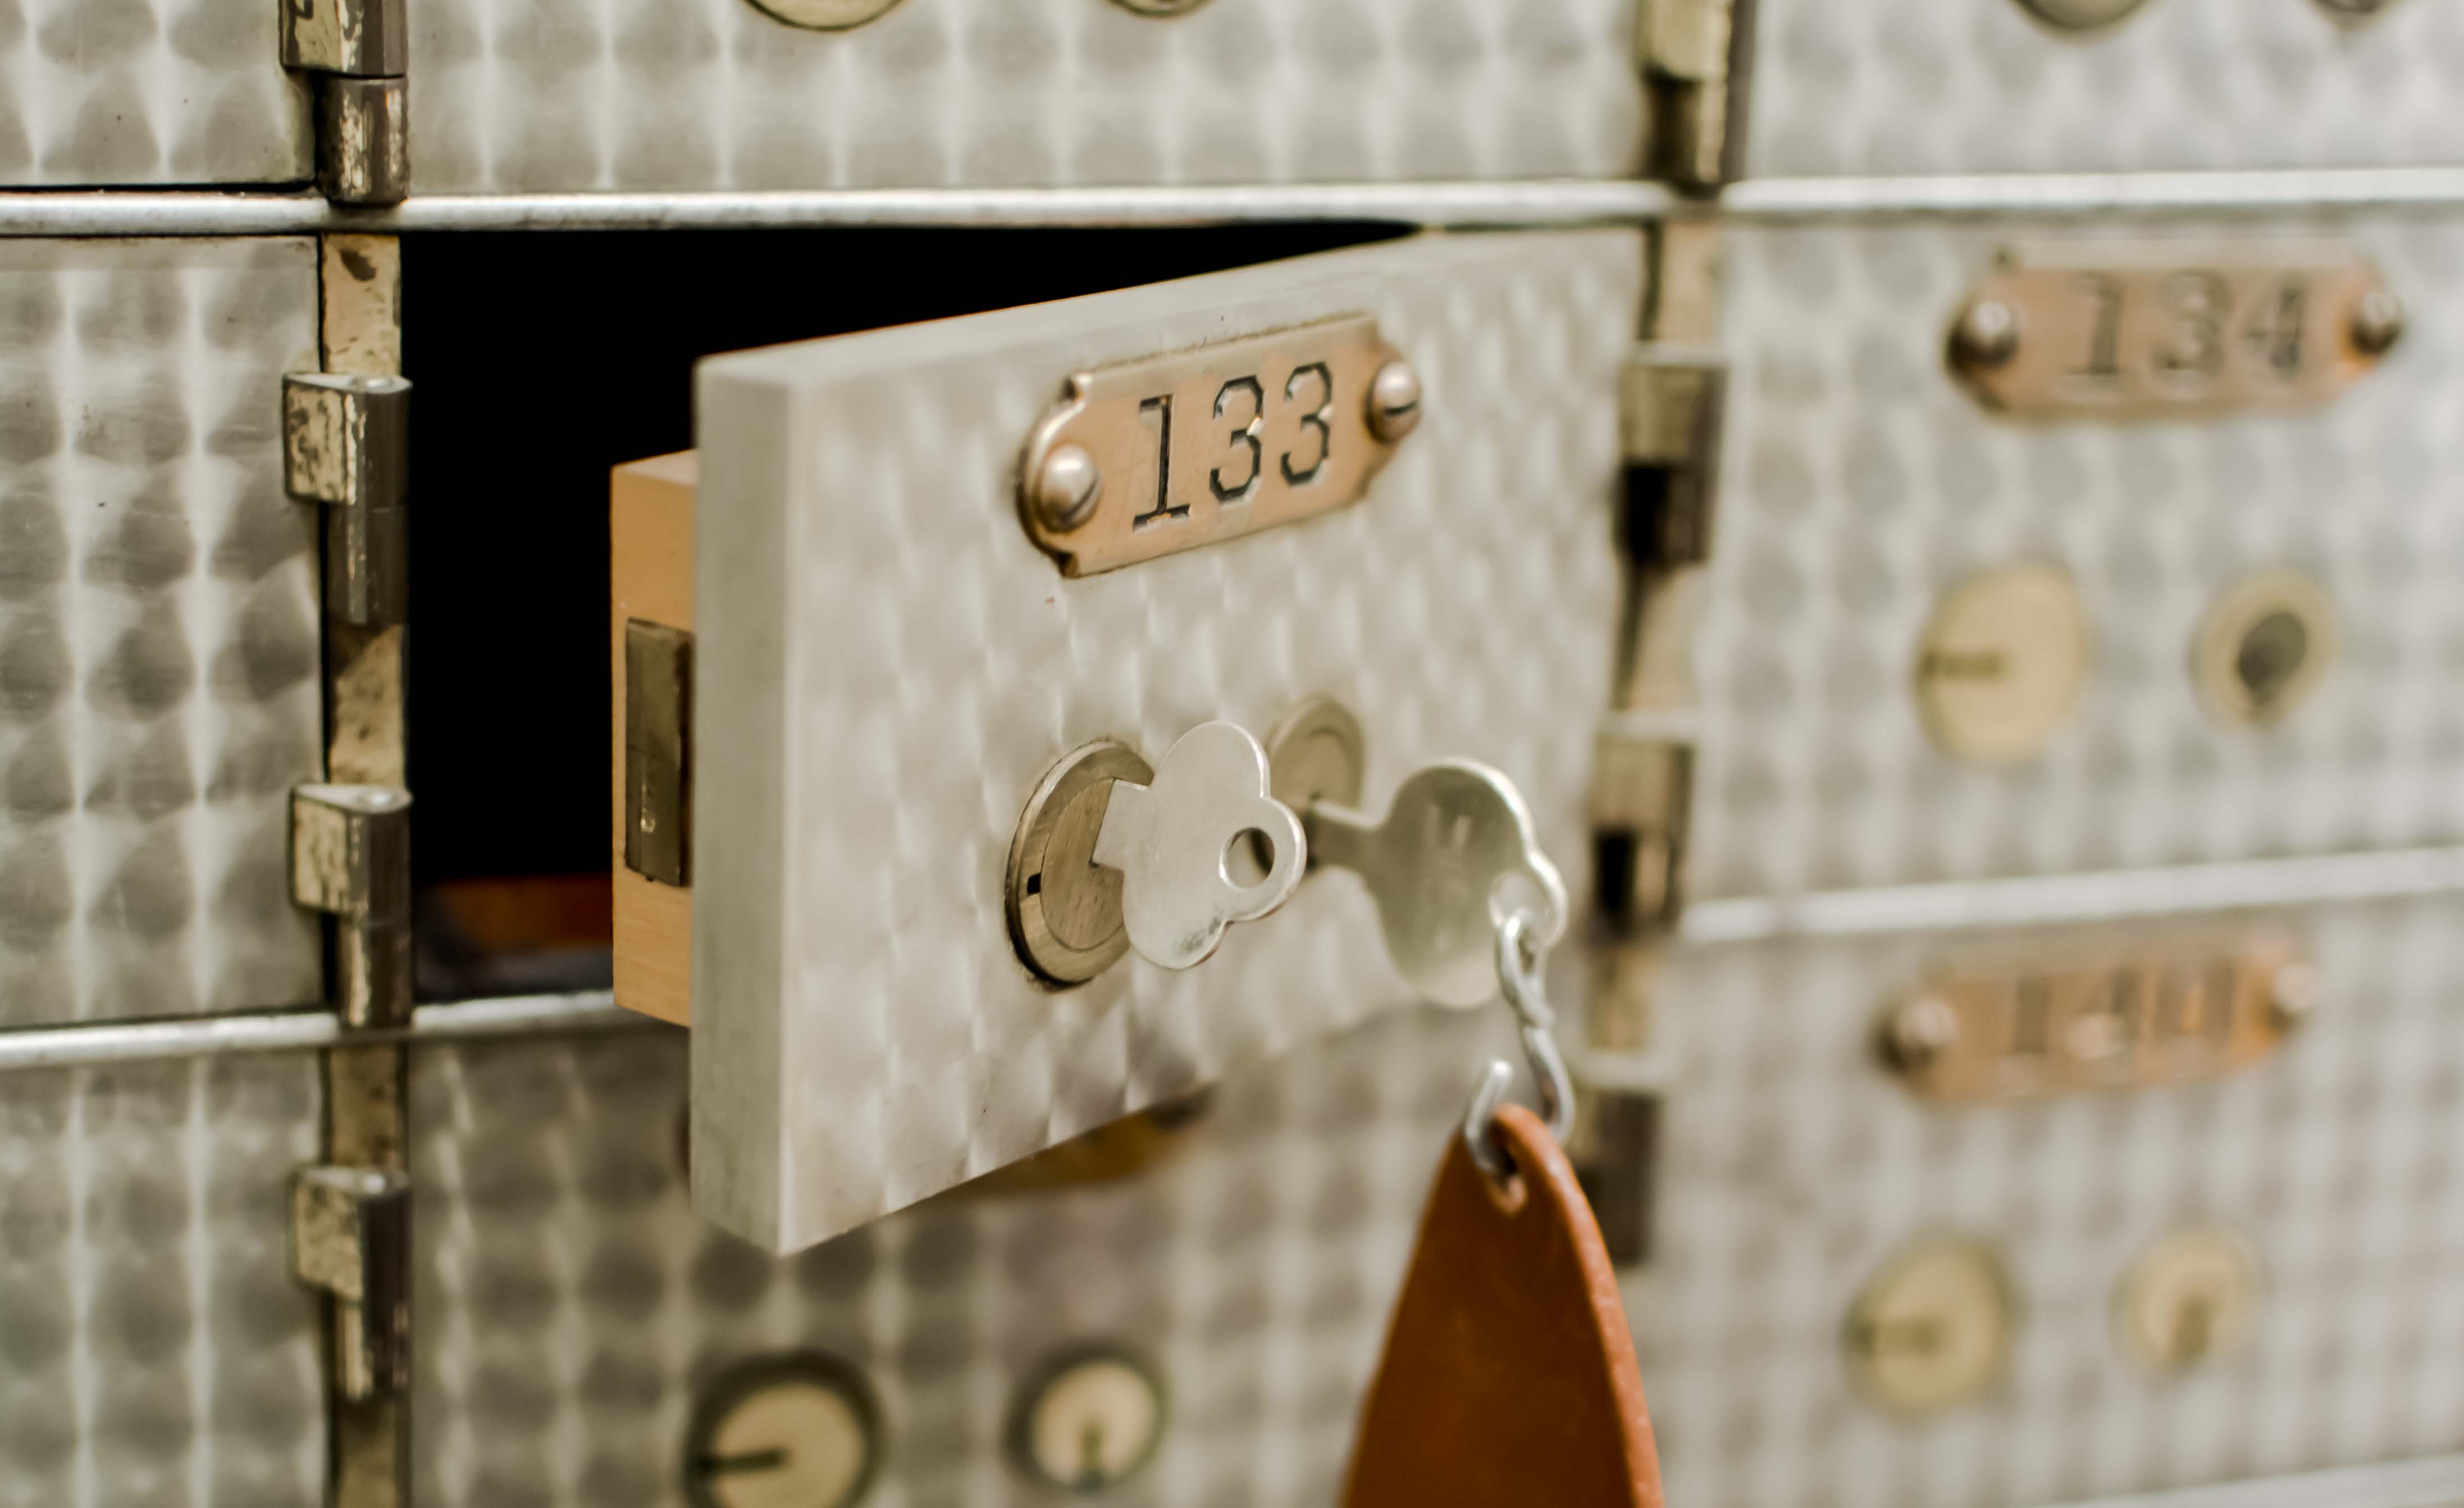 PIcture of safe Deposit Box.